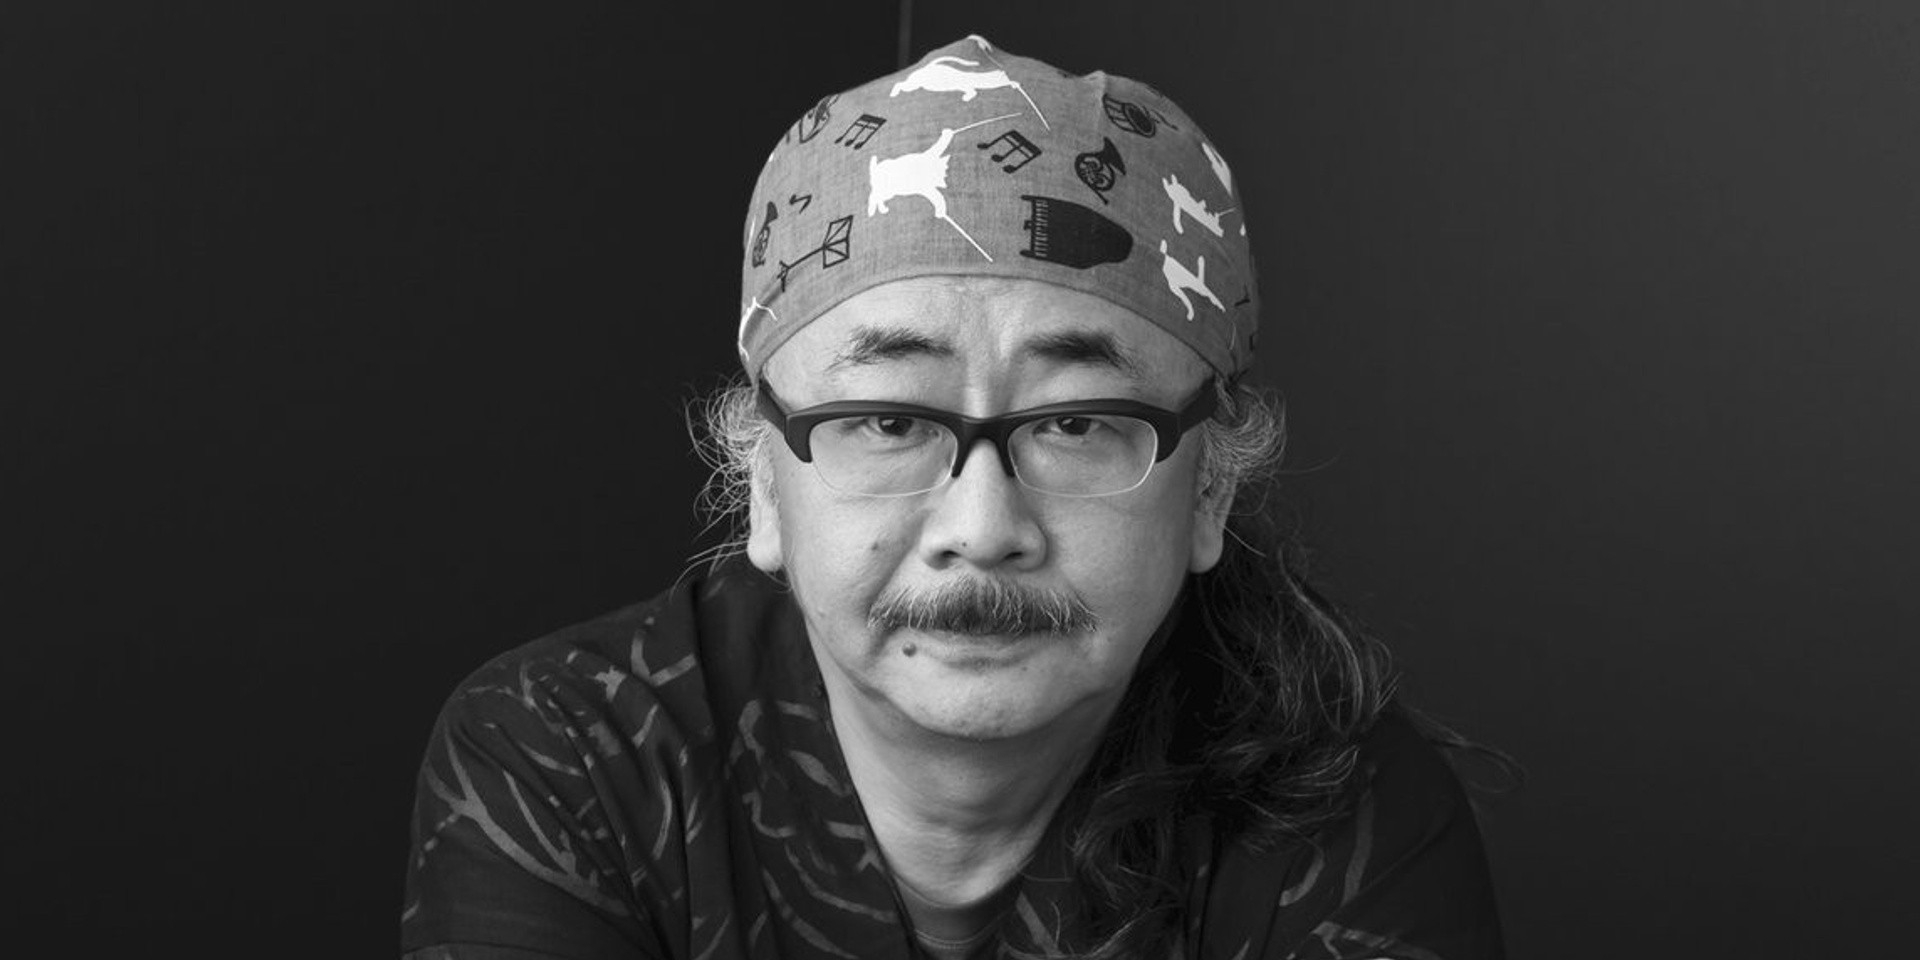 Final Fantasy composer Nobuo Uematsu to perform in Singapore for the first time